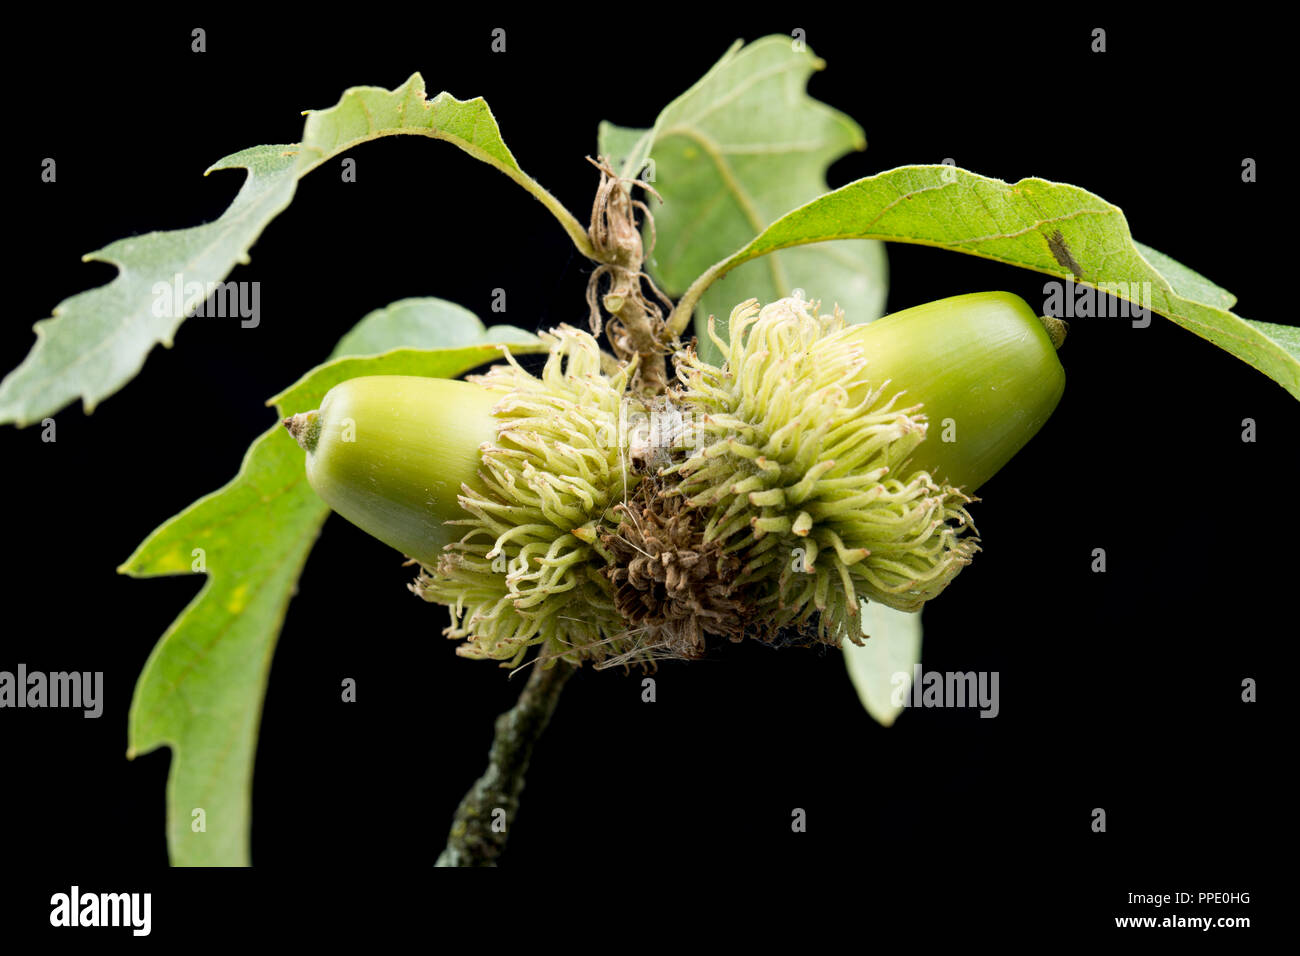 Two acorns of the Turkey oak, Quercus cerris, photographed on a black background. The Turkey oak was introduced to the UK in the early 18th century co Stock Photo